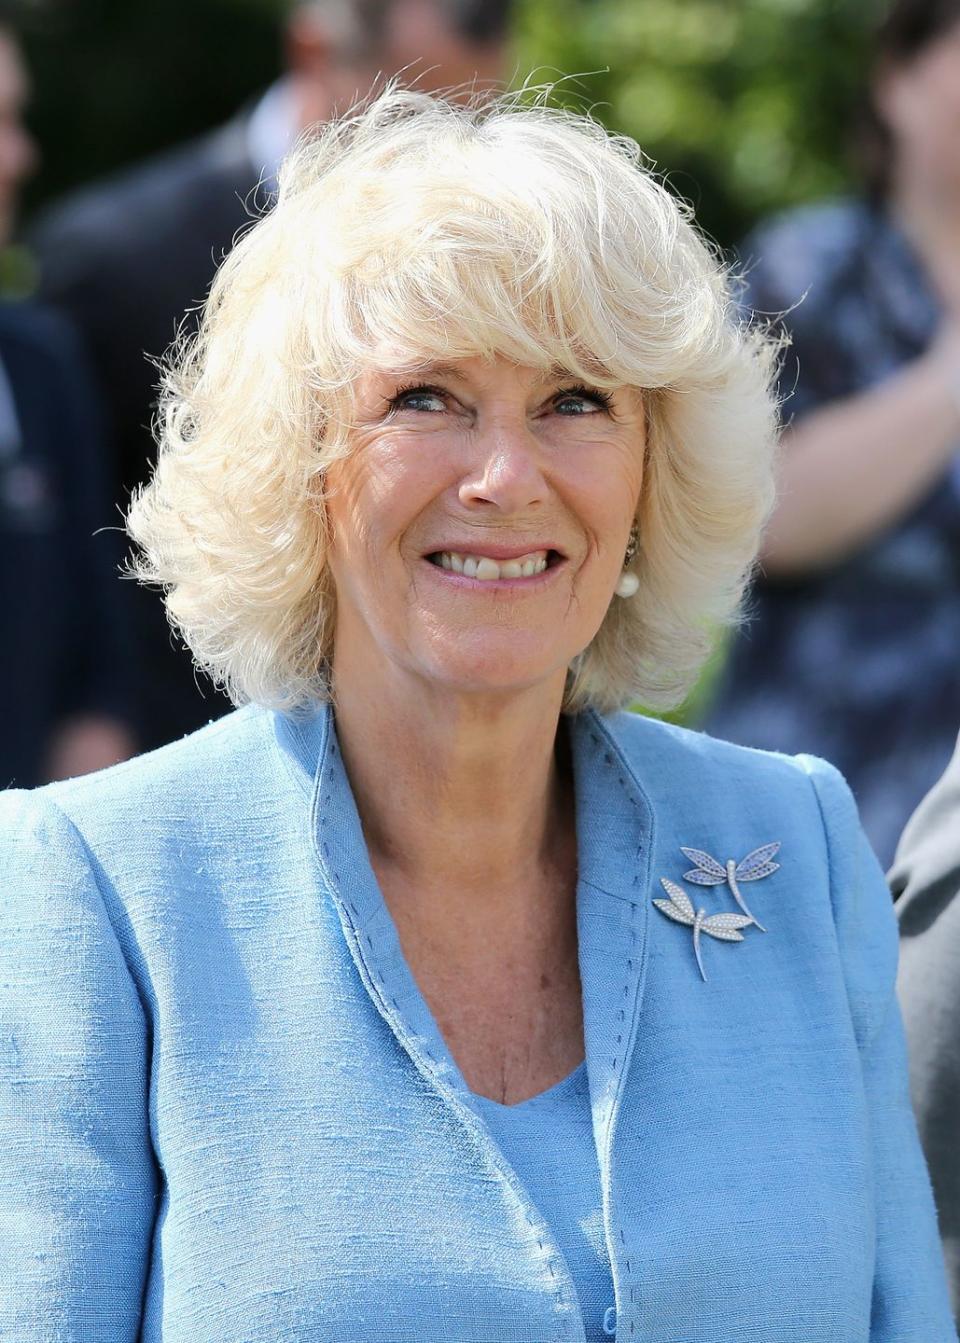 Camilla was wearing a gift from Prince Charles.